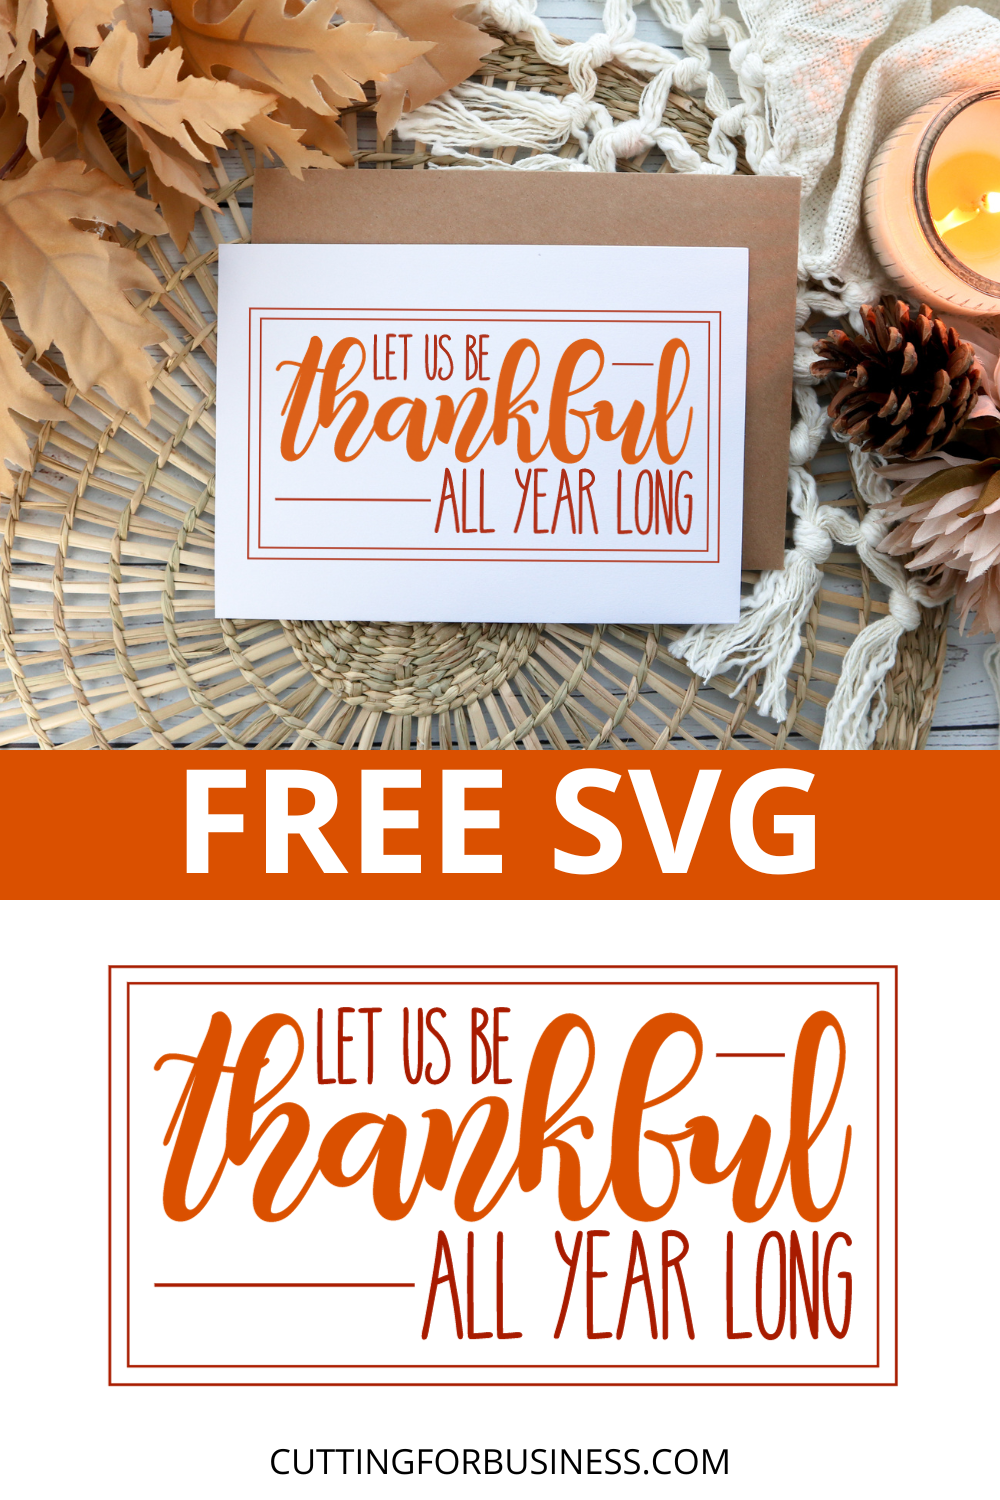 Let Us Be Thankful All Year Long SVG - cuttingforbusiness.com.